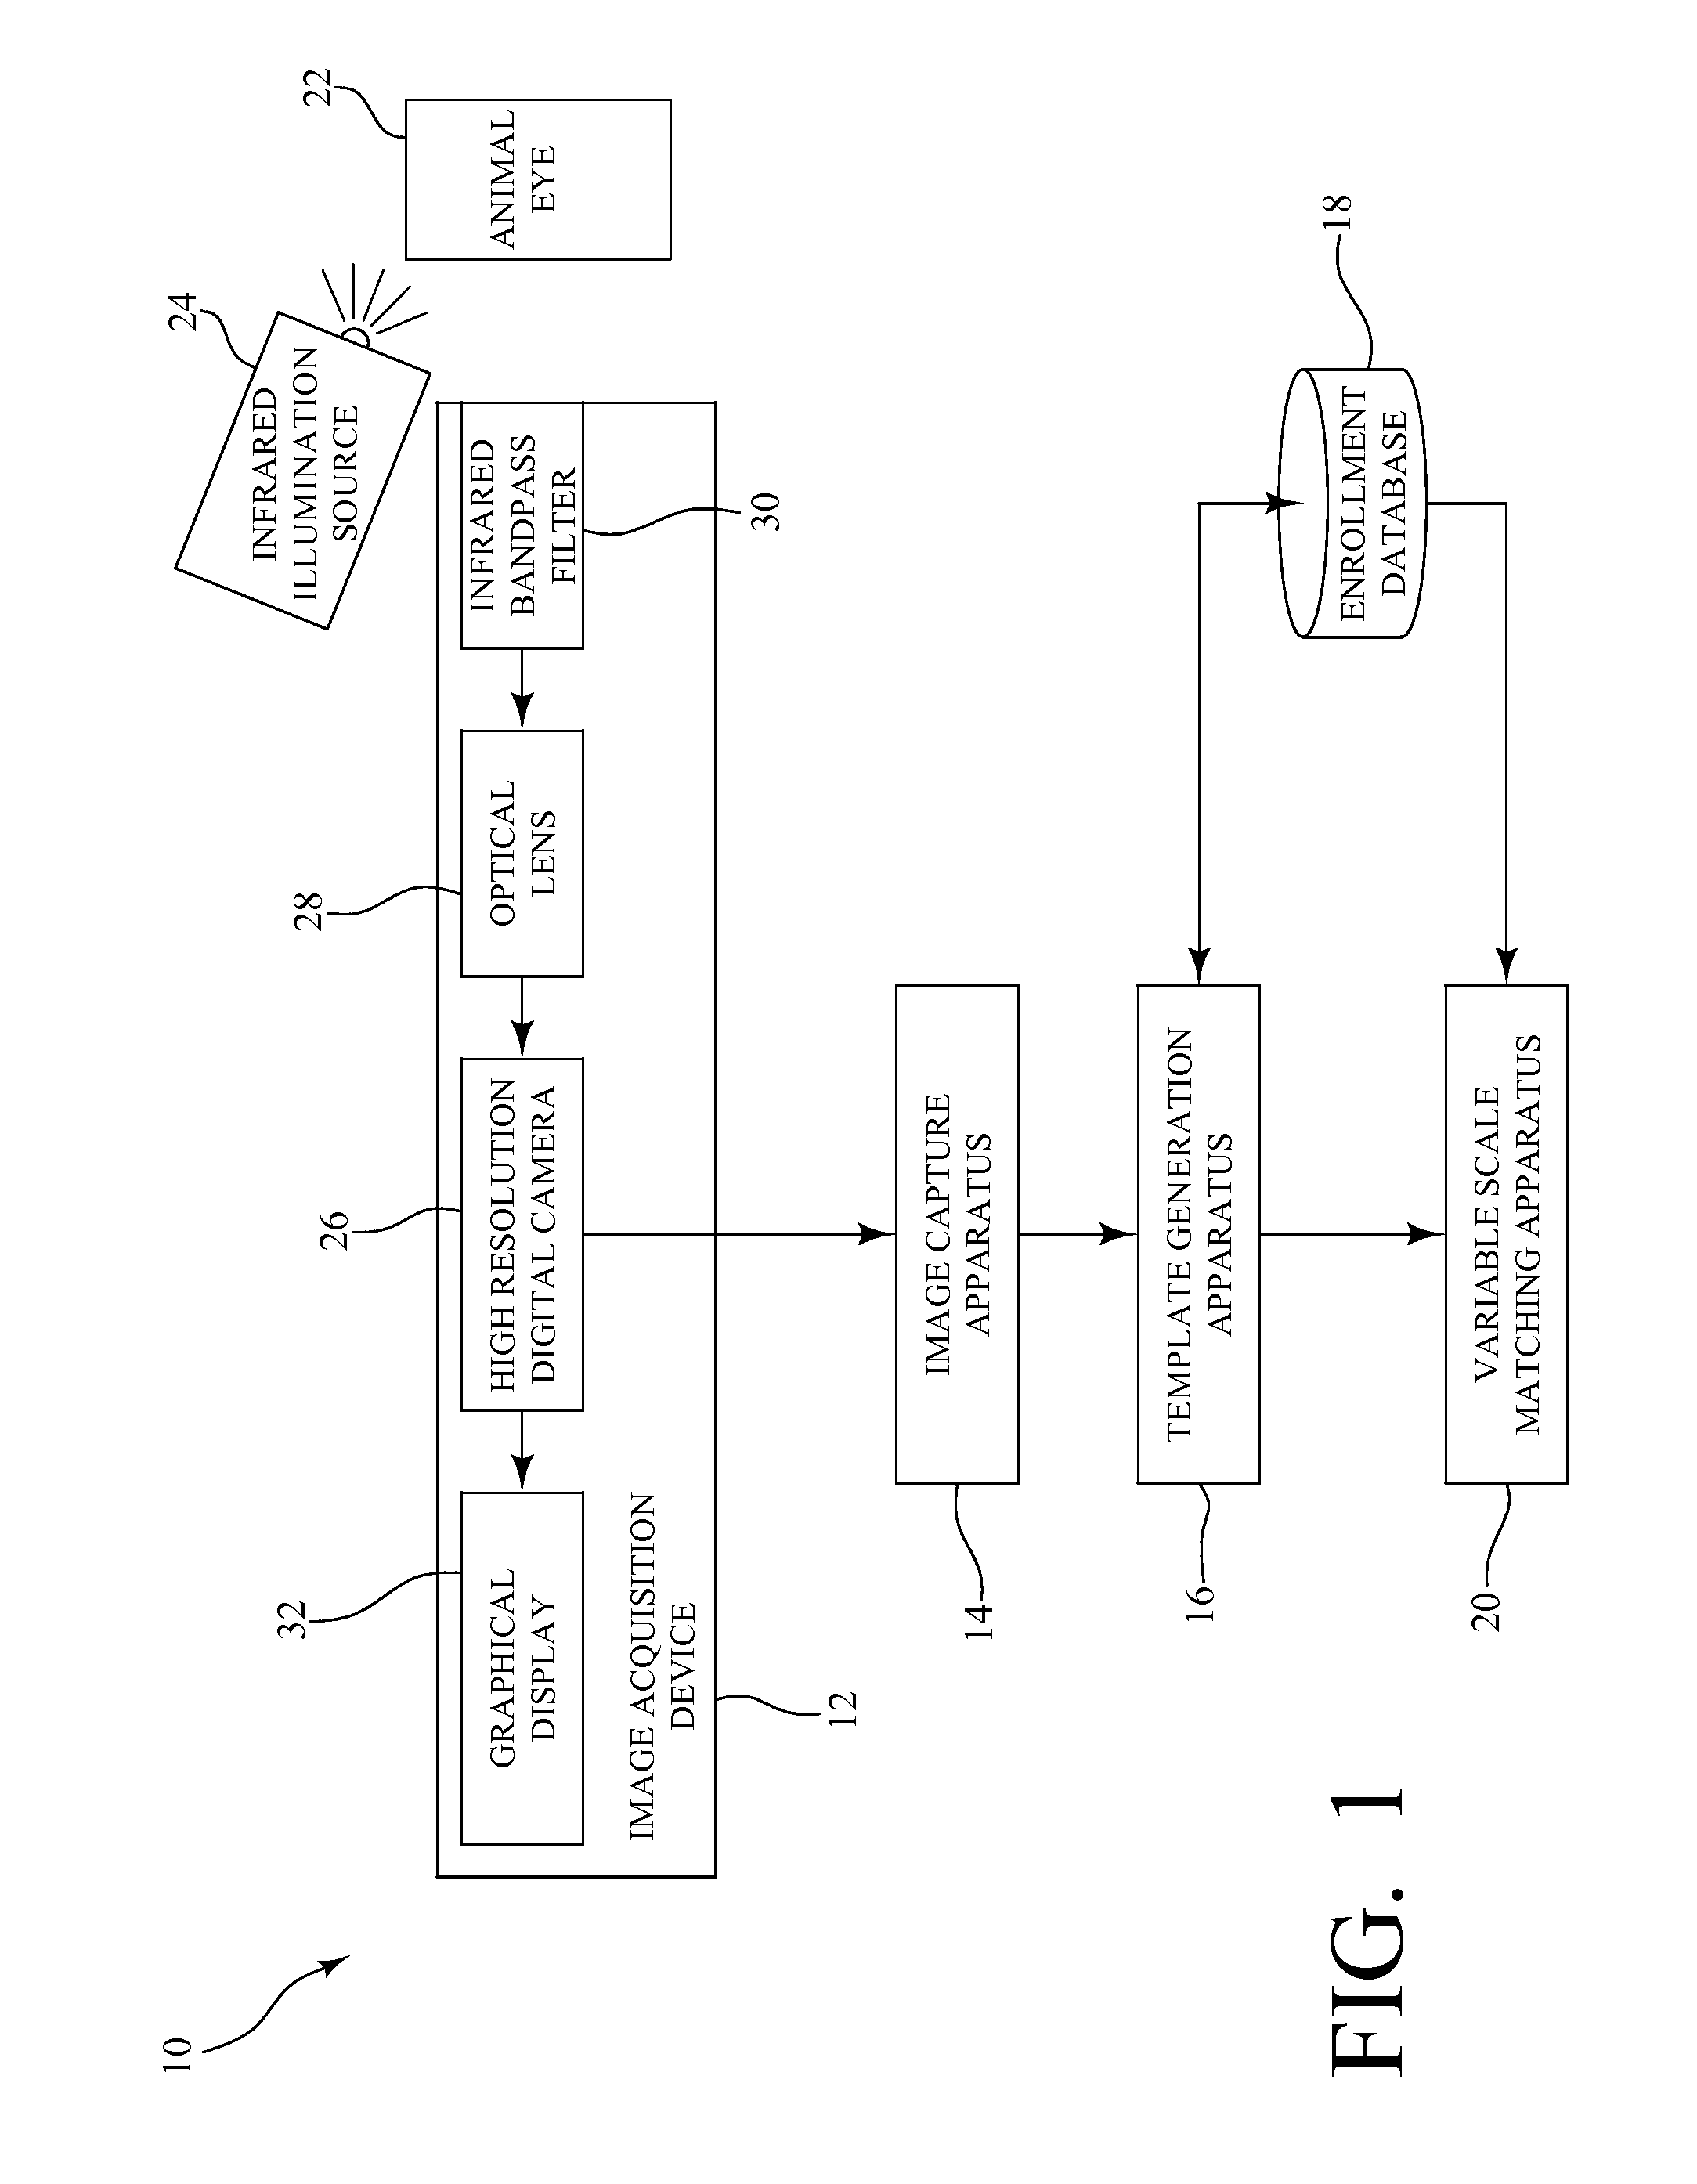 System and method for animal identification using iris images